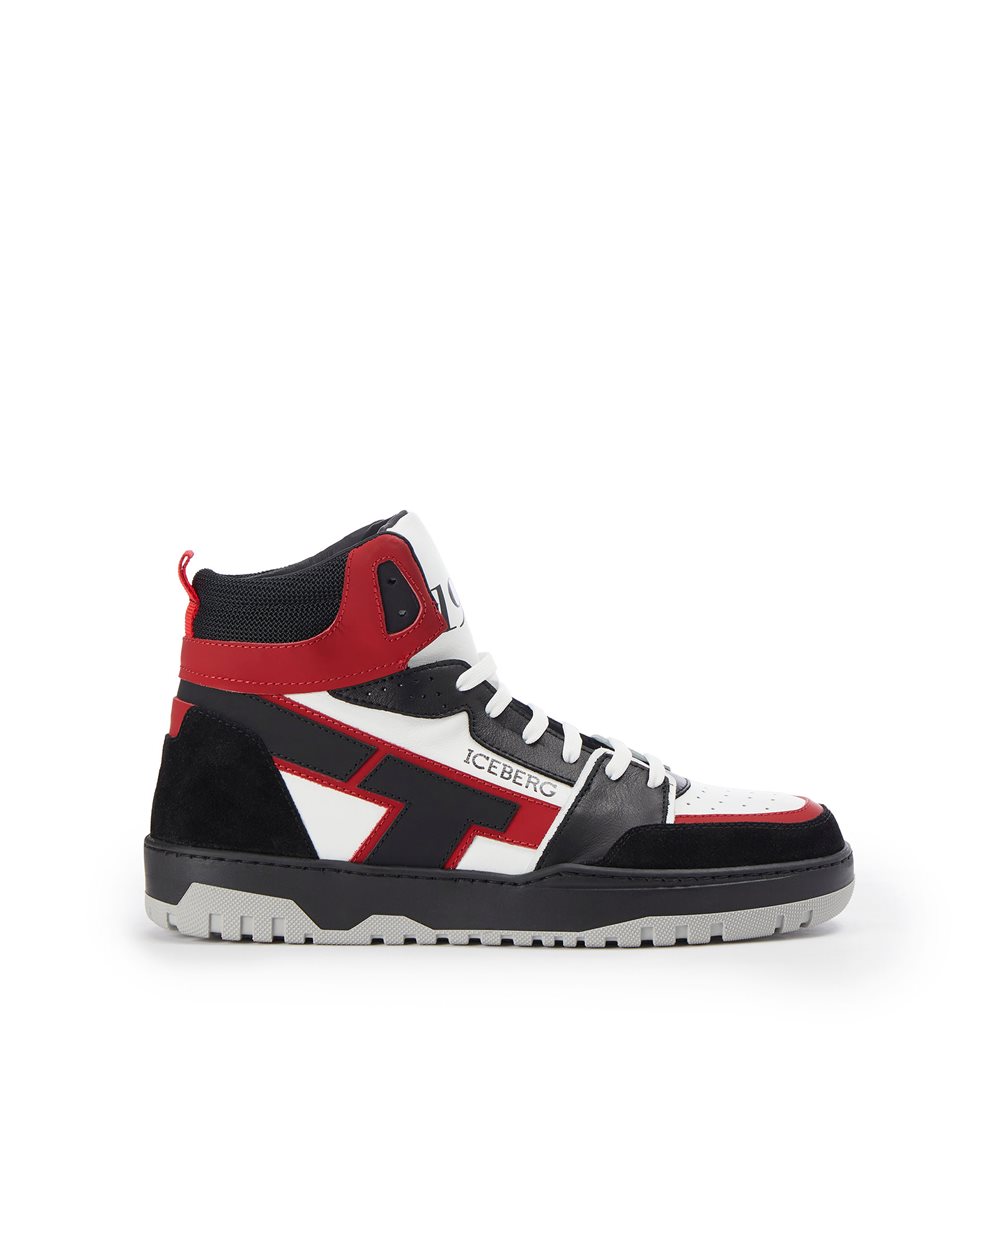 Okoro high-top sneakers - ( PRIMO STEP US ) PROMO SALDI UP TO 30%  | Iceberg - Official Website